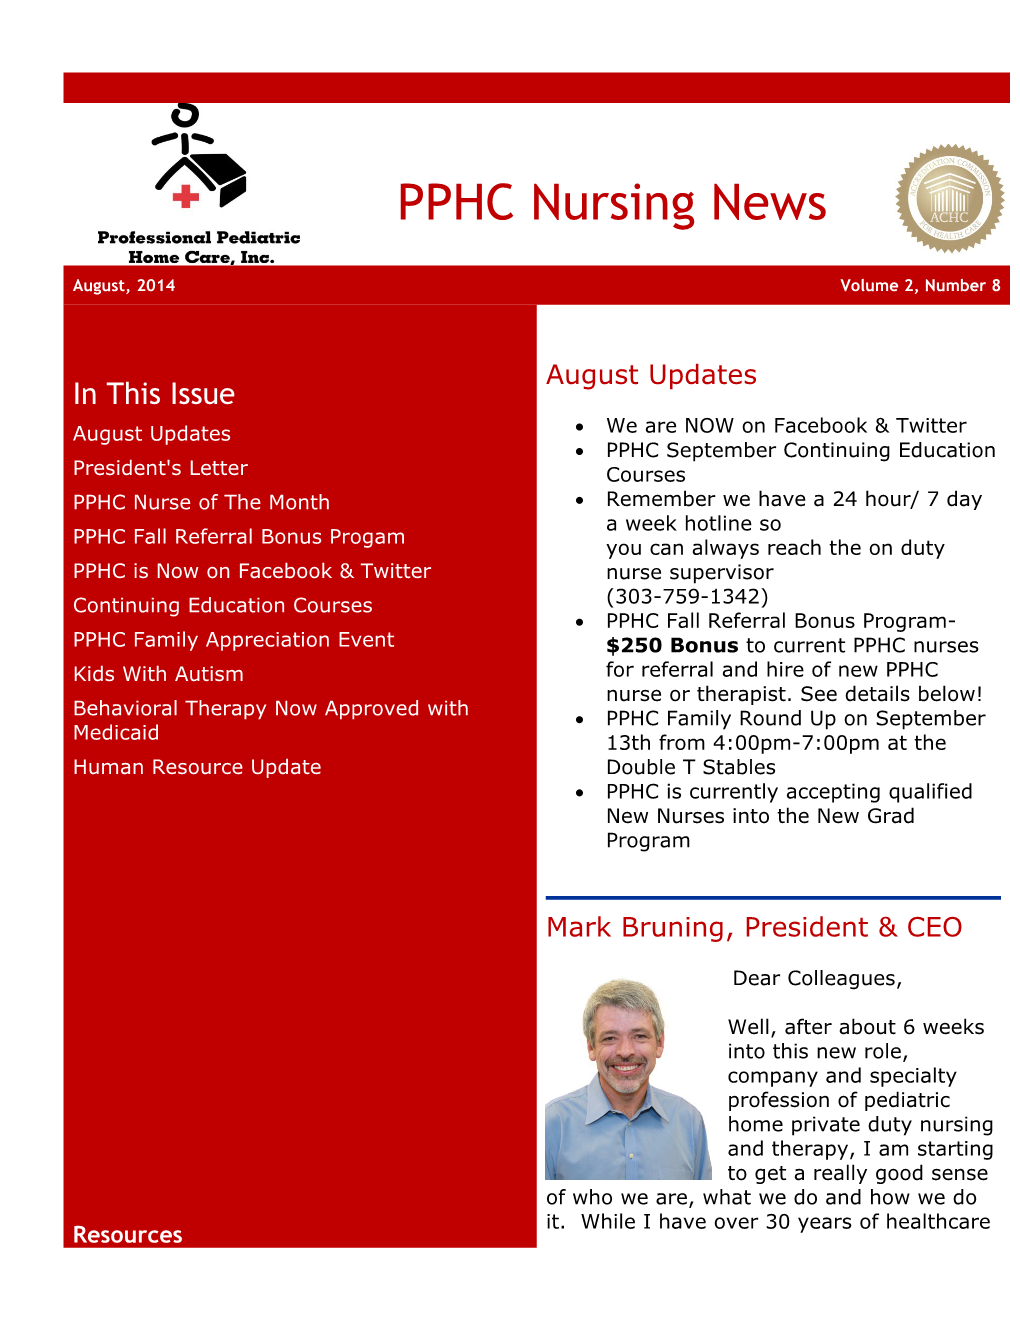 PPHC Nurse of the Month